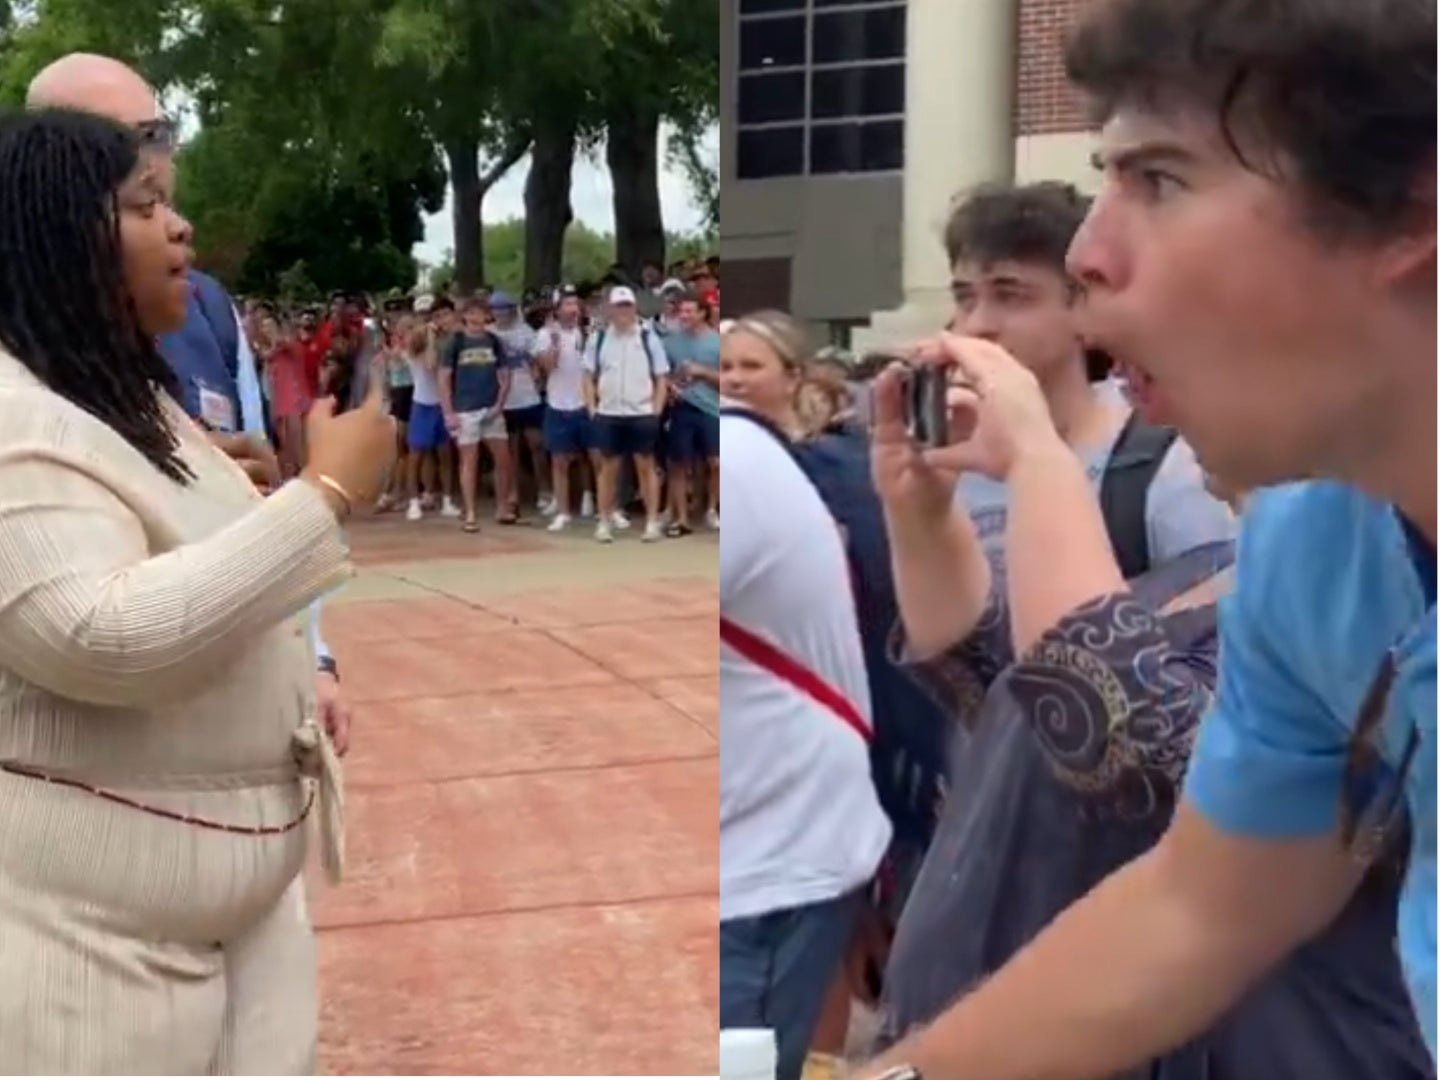 Screengrab shows Ole Miss protester (left) and the counter-protester (right) who made monkey noises at her during a Gaza solidarity protest